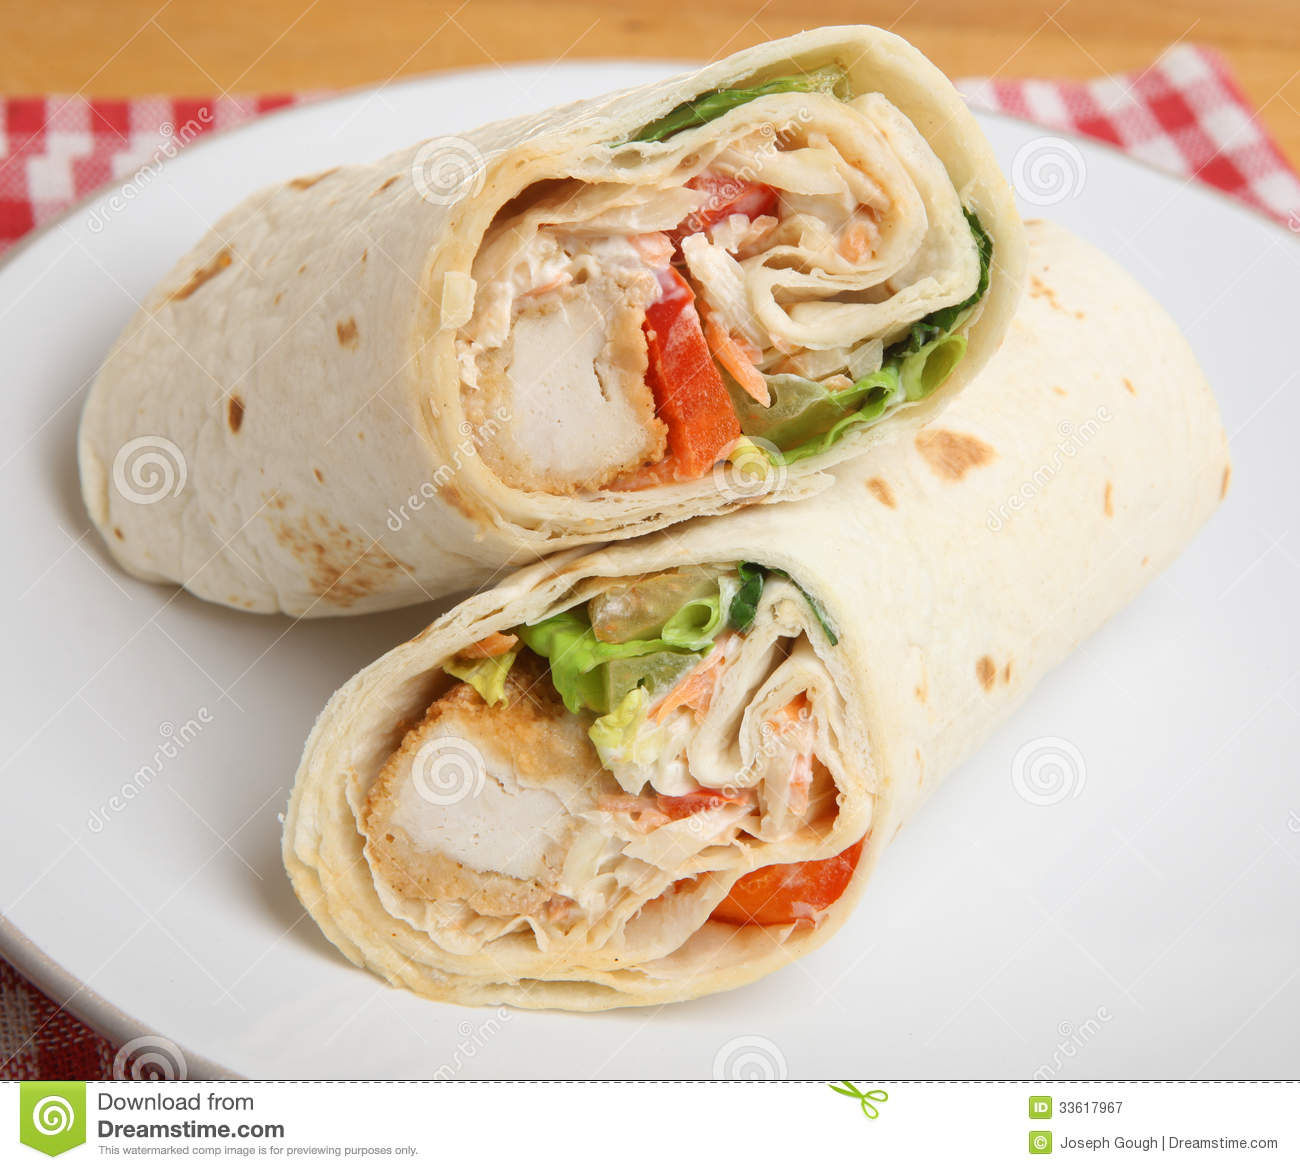 Southern Fried Chicken Wrap Sandwich Royalty Free Stock Photography